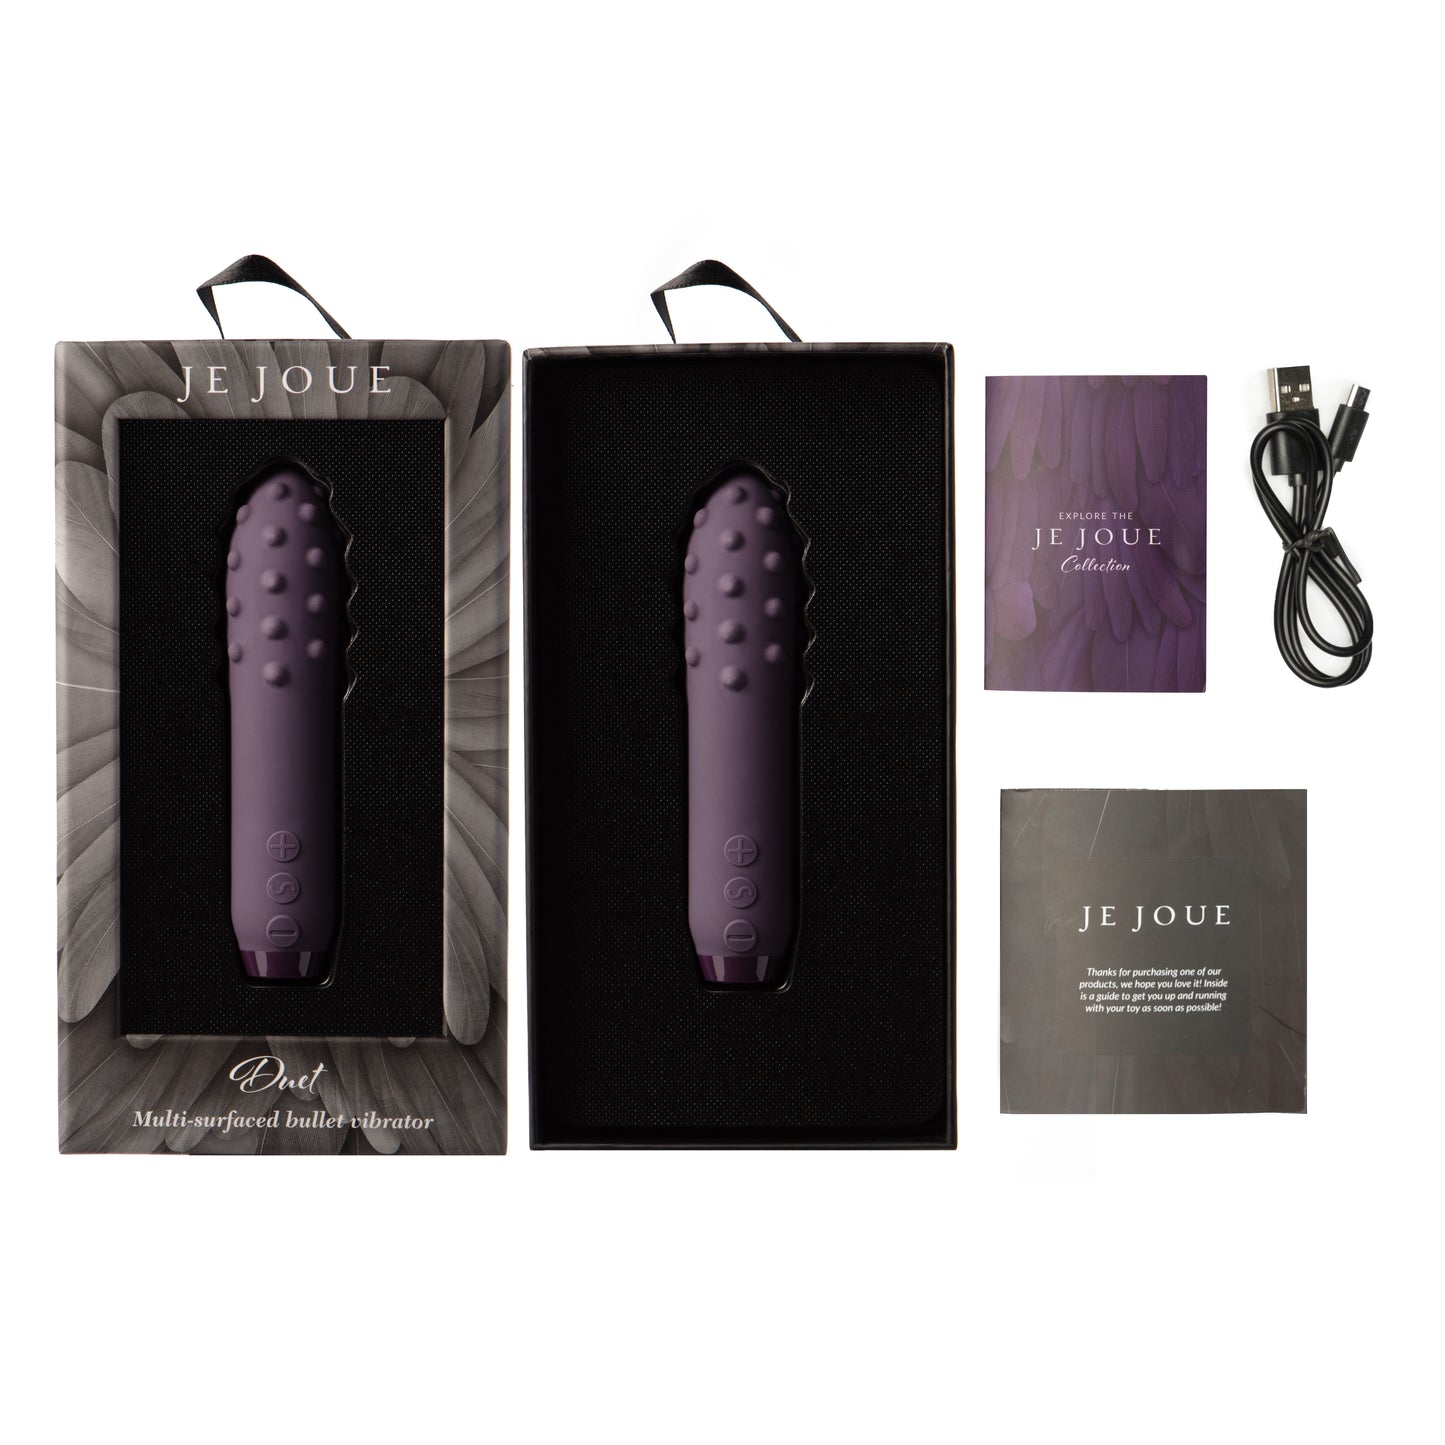 Duet bullet vibrator in purple in box with accessories on side 